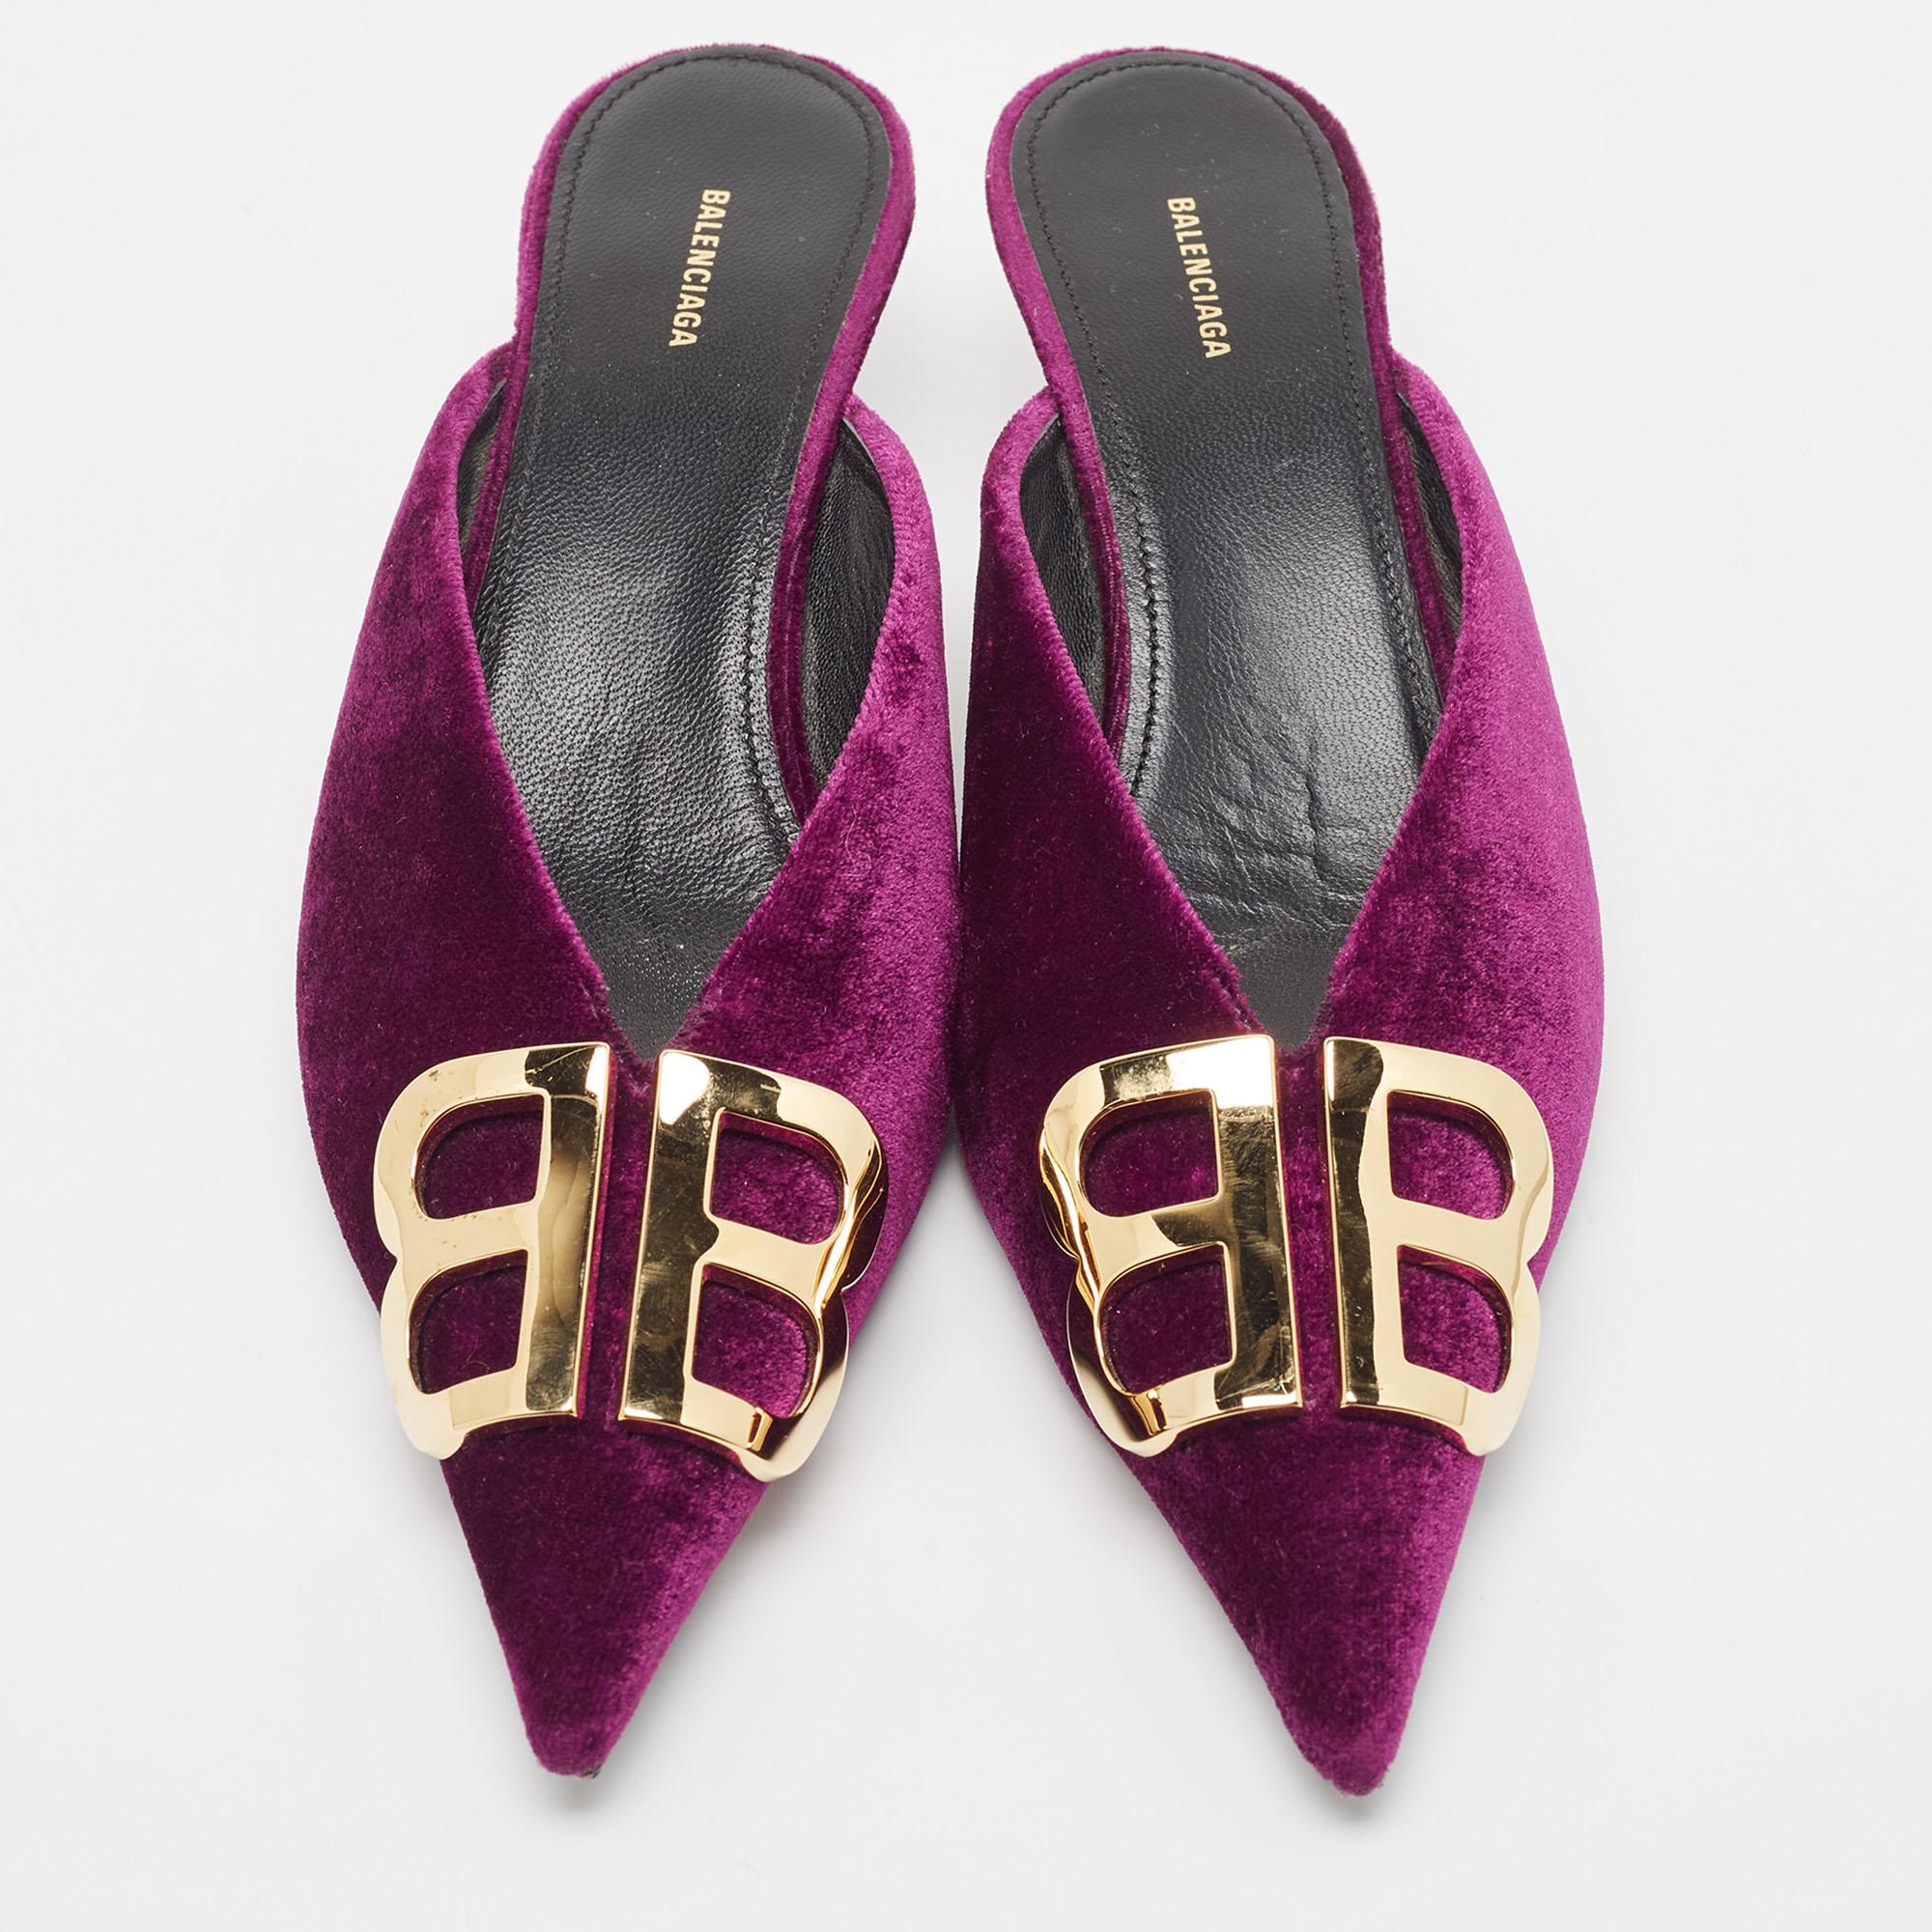 Sleek and sharp, these Balenciaga mules will perfectly complement any OOTD. They have elongated pointed toes and BB logo detailing on the uppers. The shoes are made using velvet and raised on kitten heels.

Includes: Original Dustbag, Extra Heel